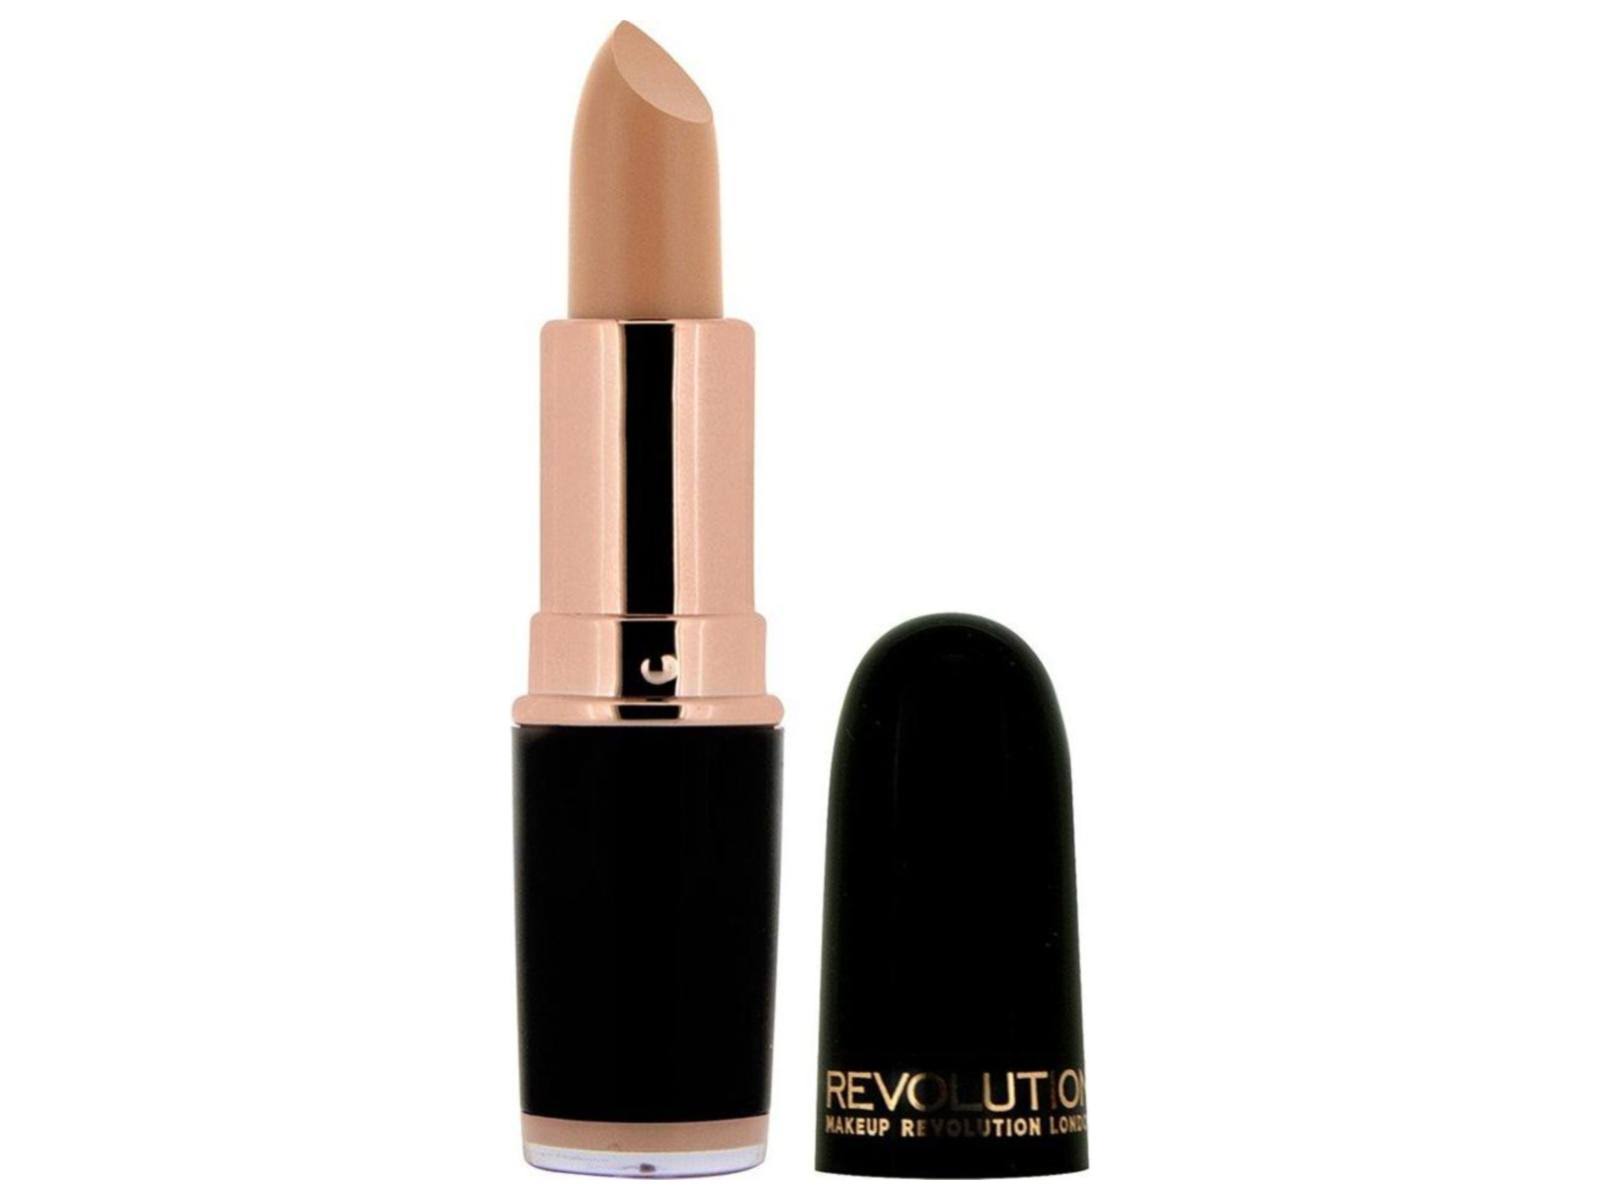 Makeup Revolution Iconic Lipstick - Game Mystery Matte, 3.2g